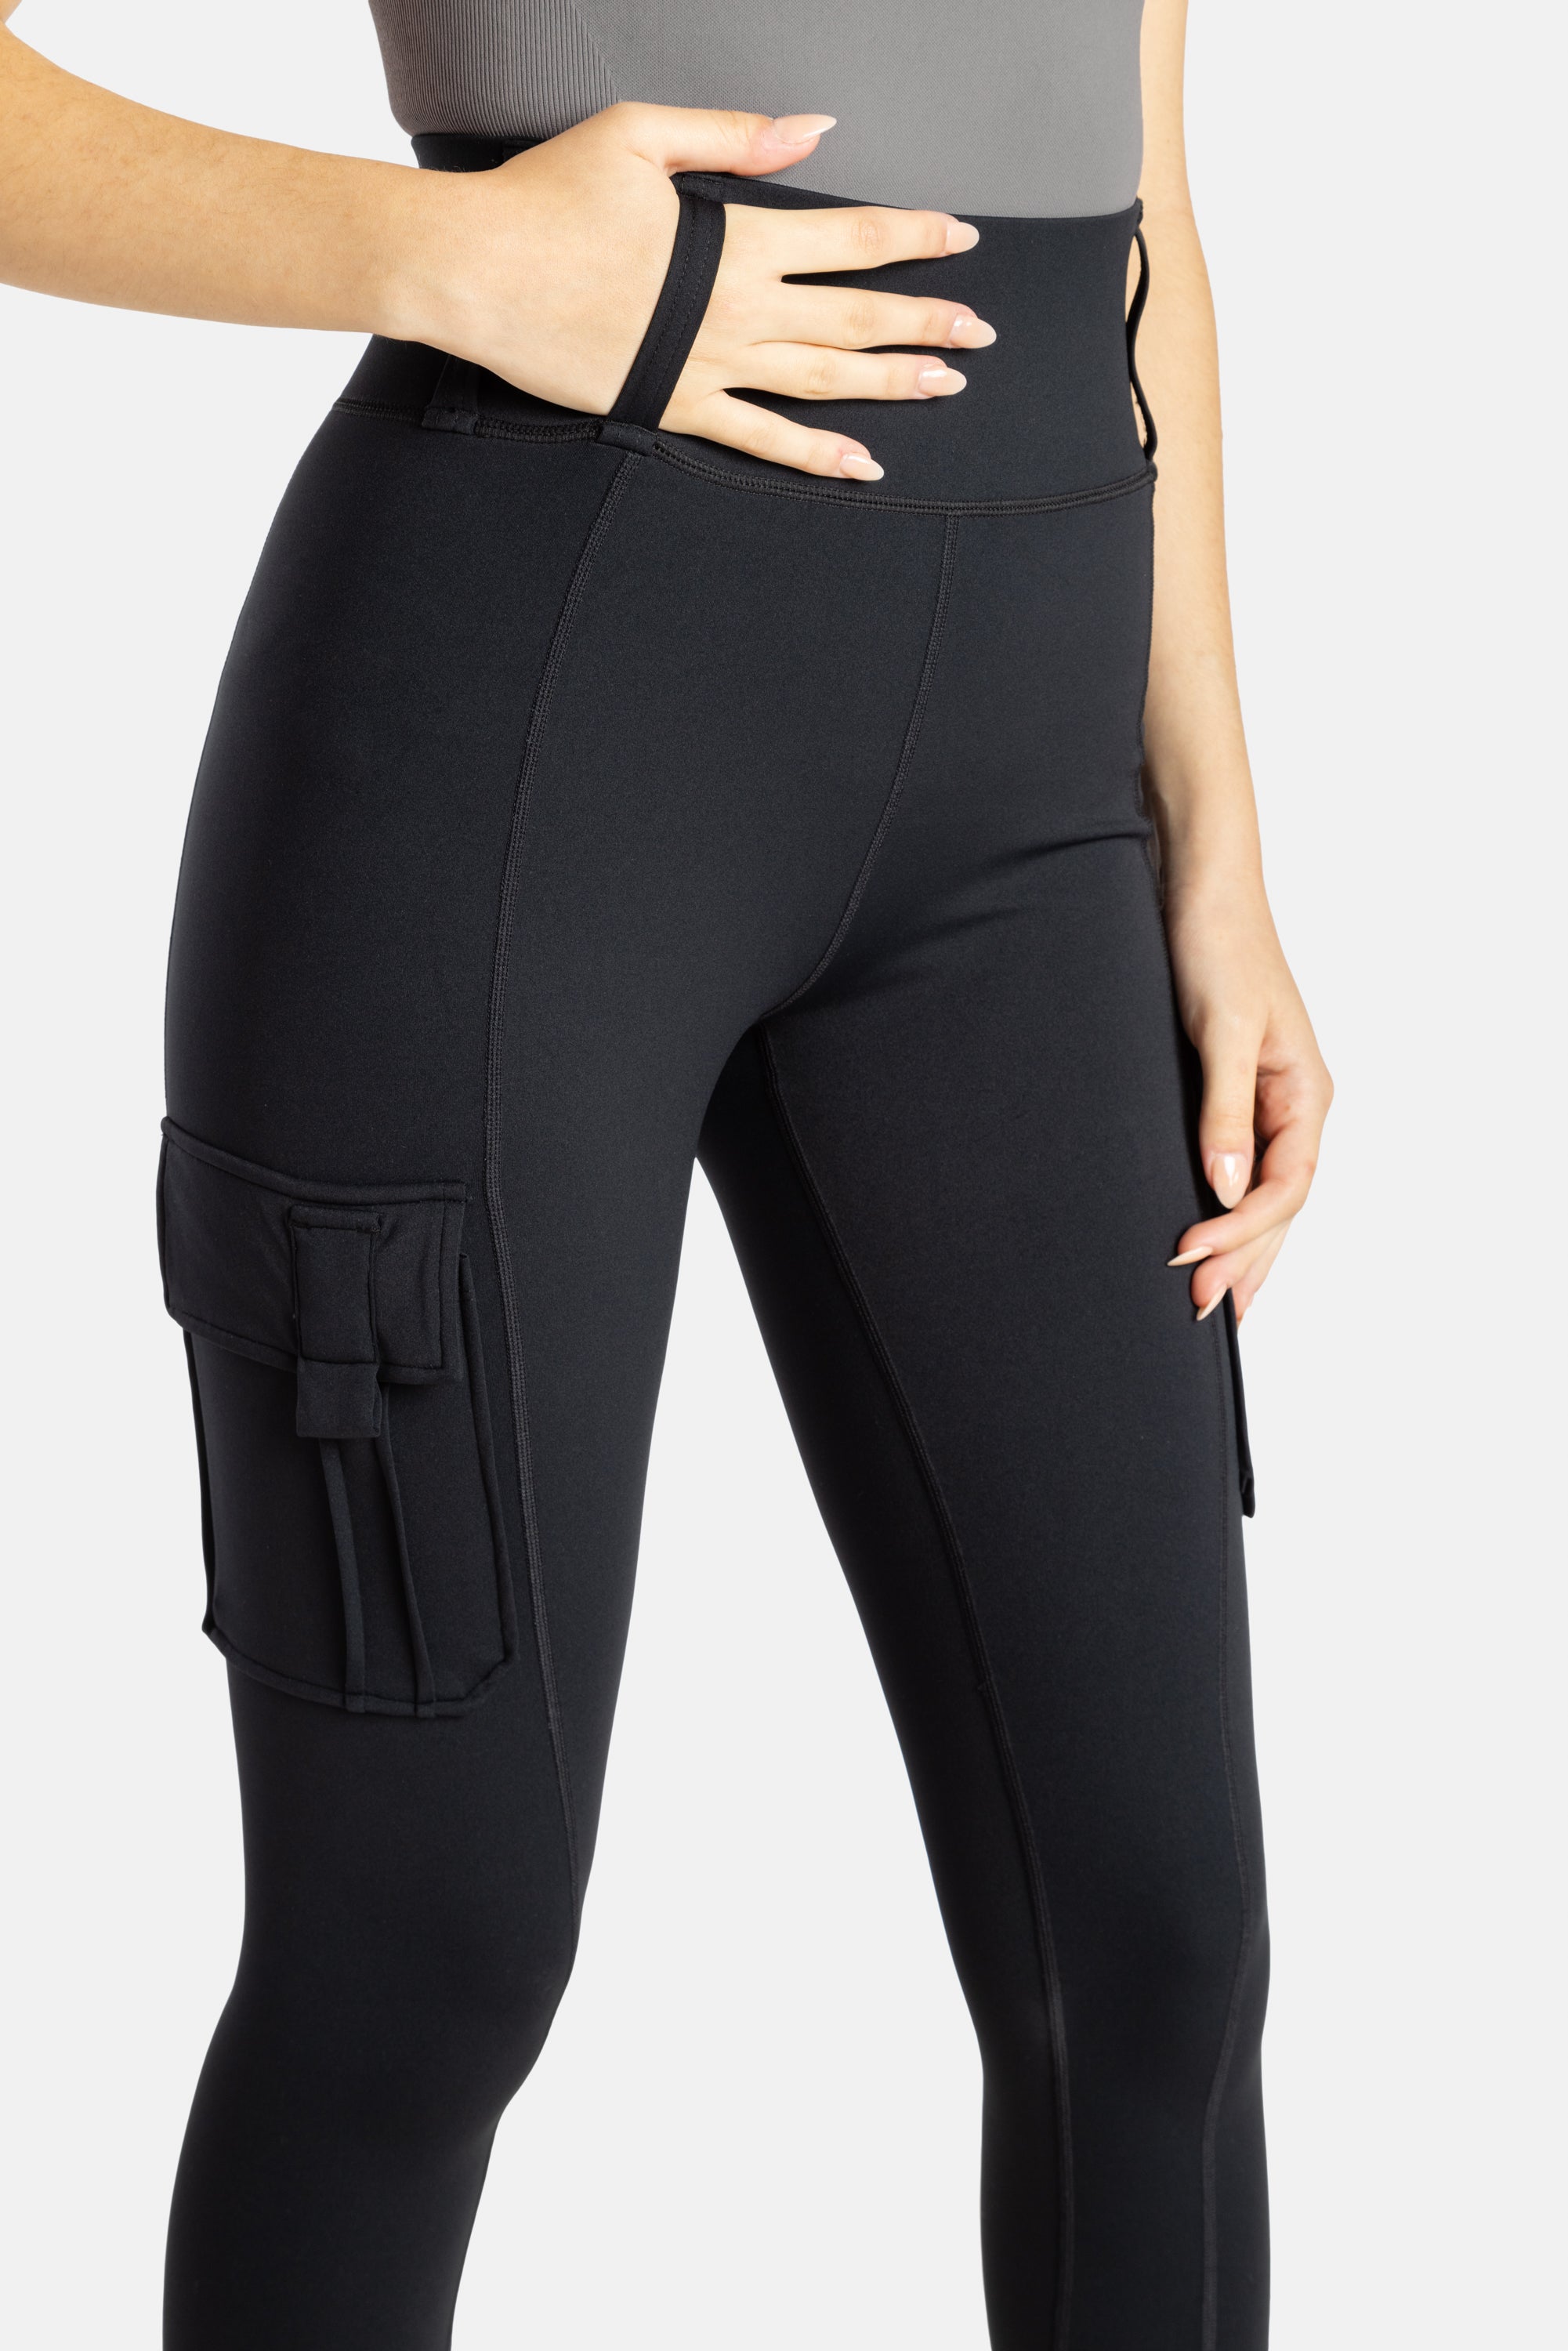 The close up of the black leggings. A hand is in the loop on the top of the pants.